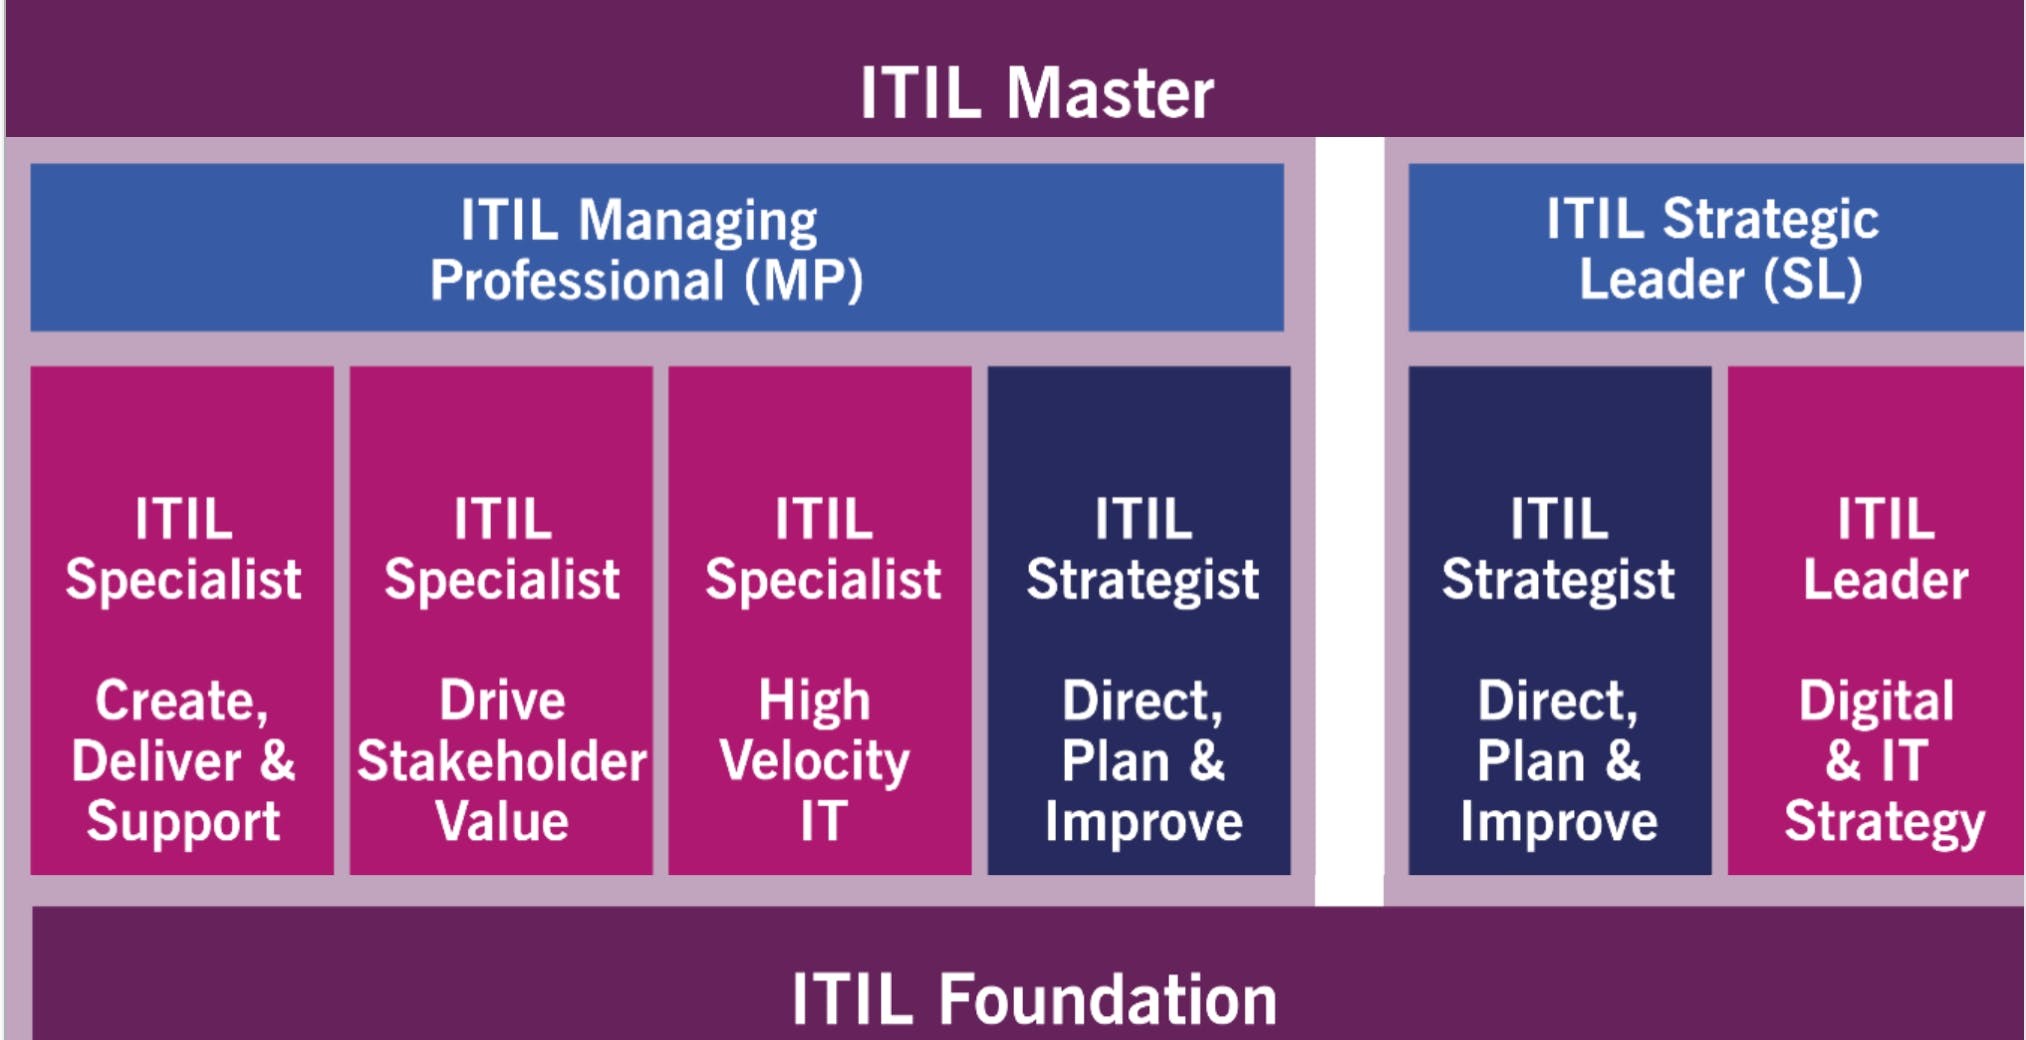 ITIL4 Leader Digital and IT Strategy